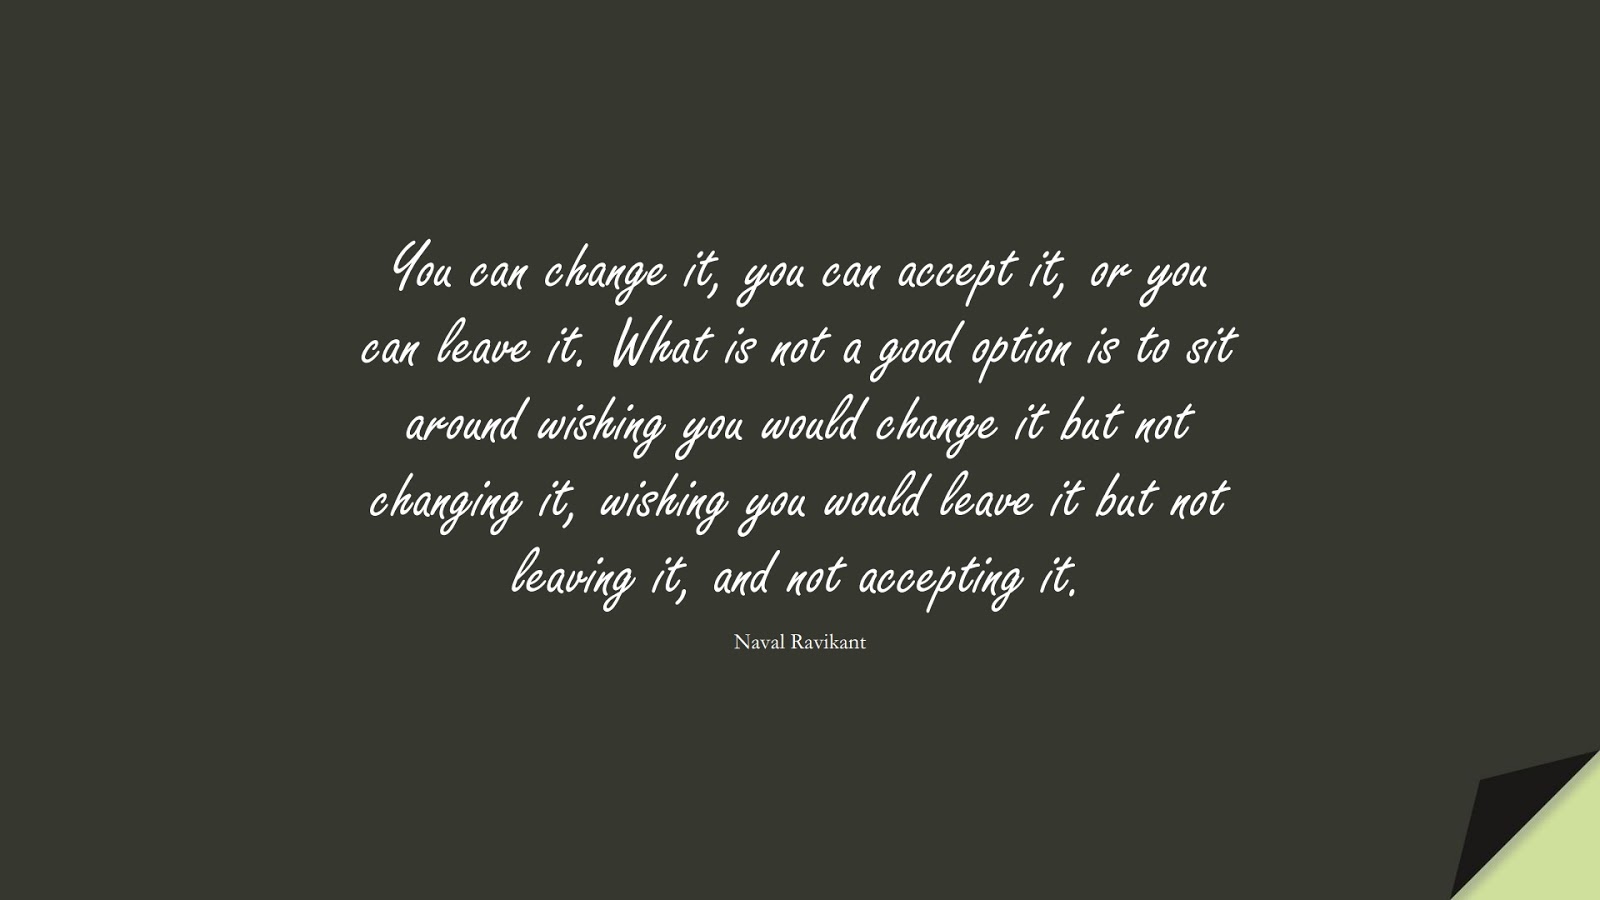 You can change it, you can accept it, or you can leave it. What is not a good option is to sit around wishing you would change it but not changing it, wishing you would leave it but not leaving it, and not accepting it. (Naval Ravikant);  #StoicQuotes